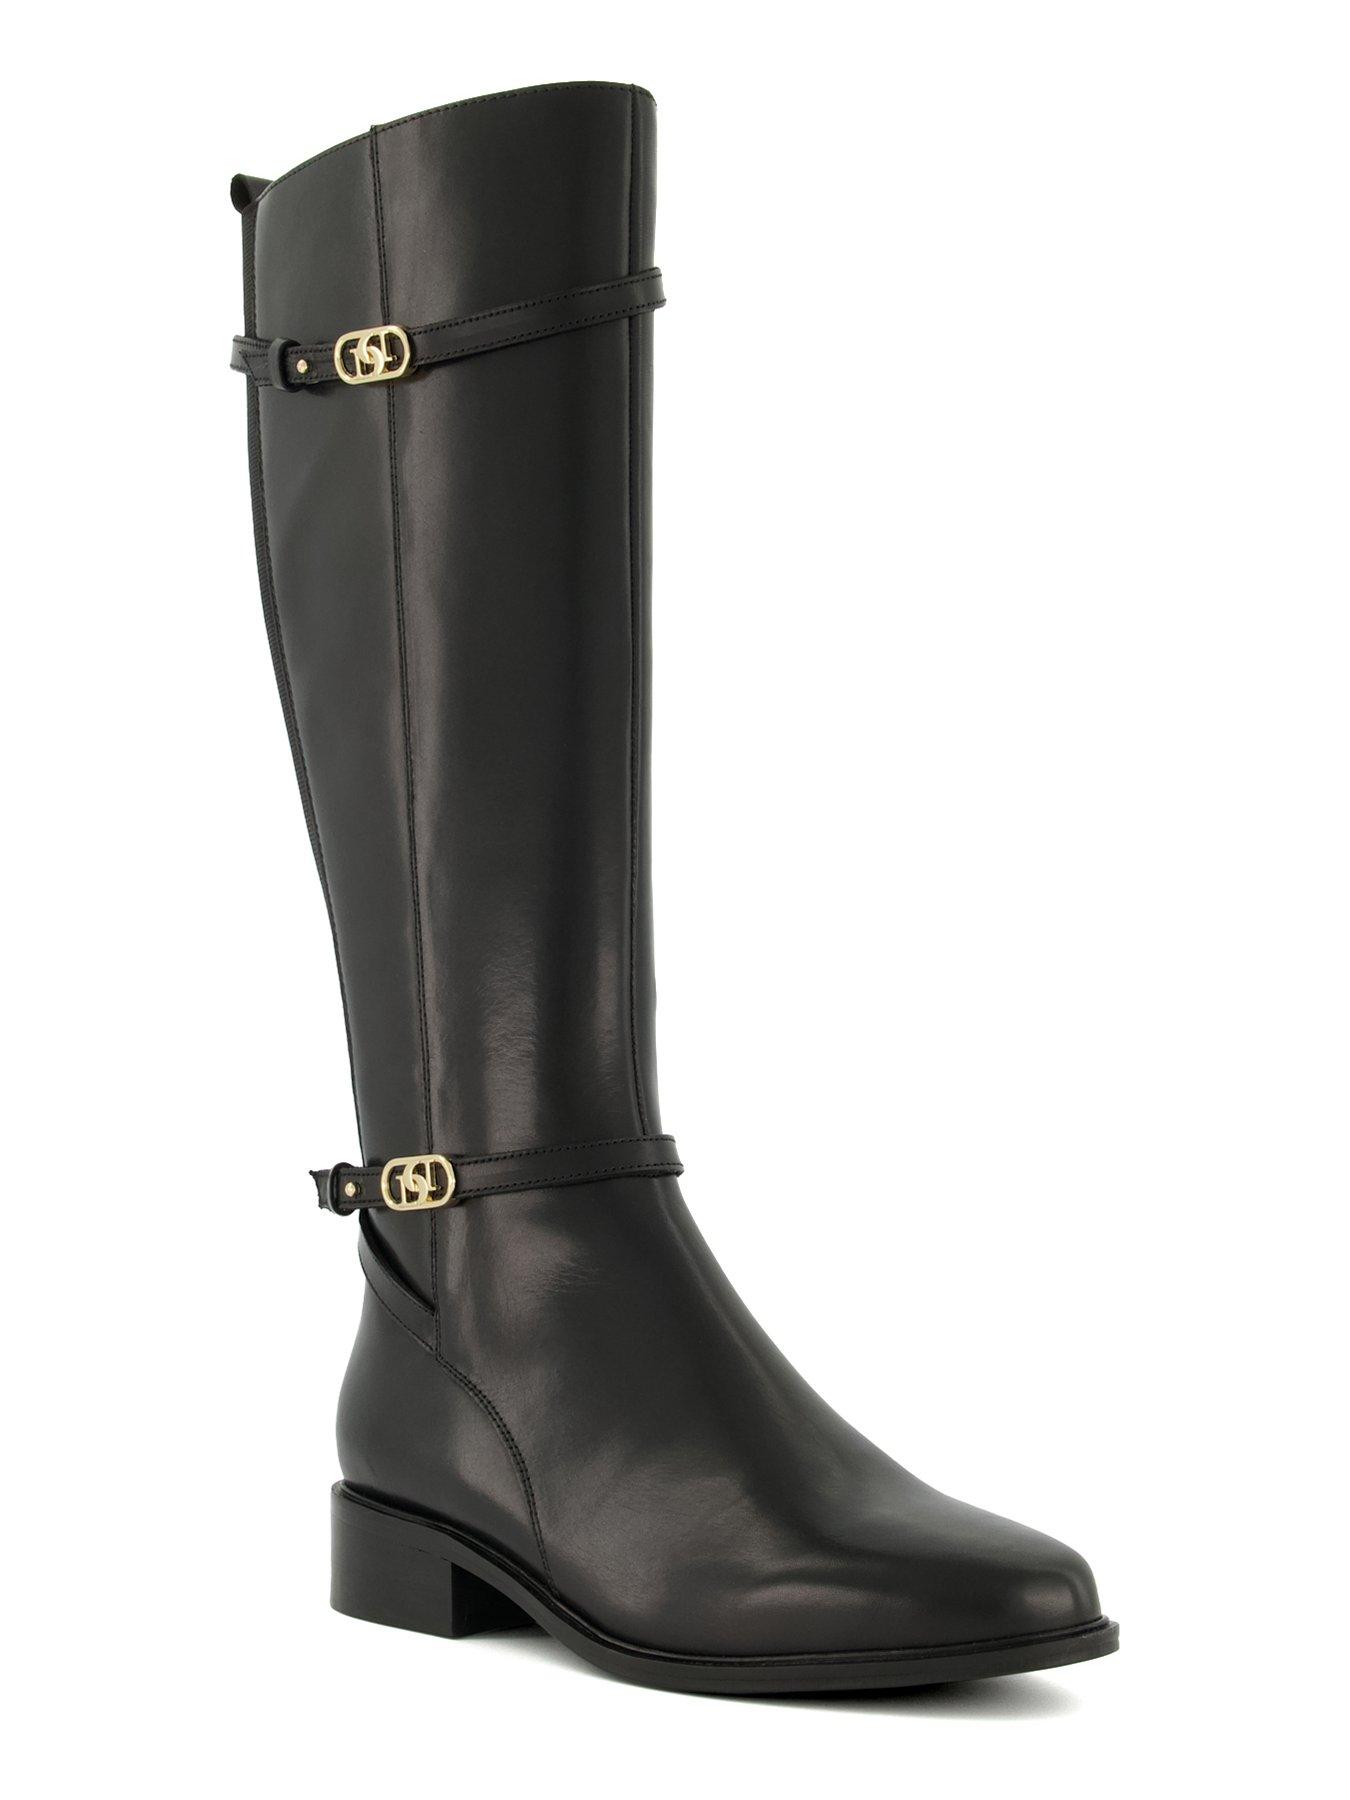 Dune London Dune Tup Leather Knee High Riding Boots - Black | very.co.uk